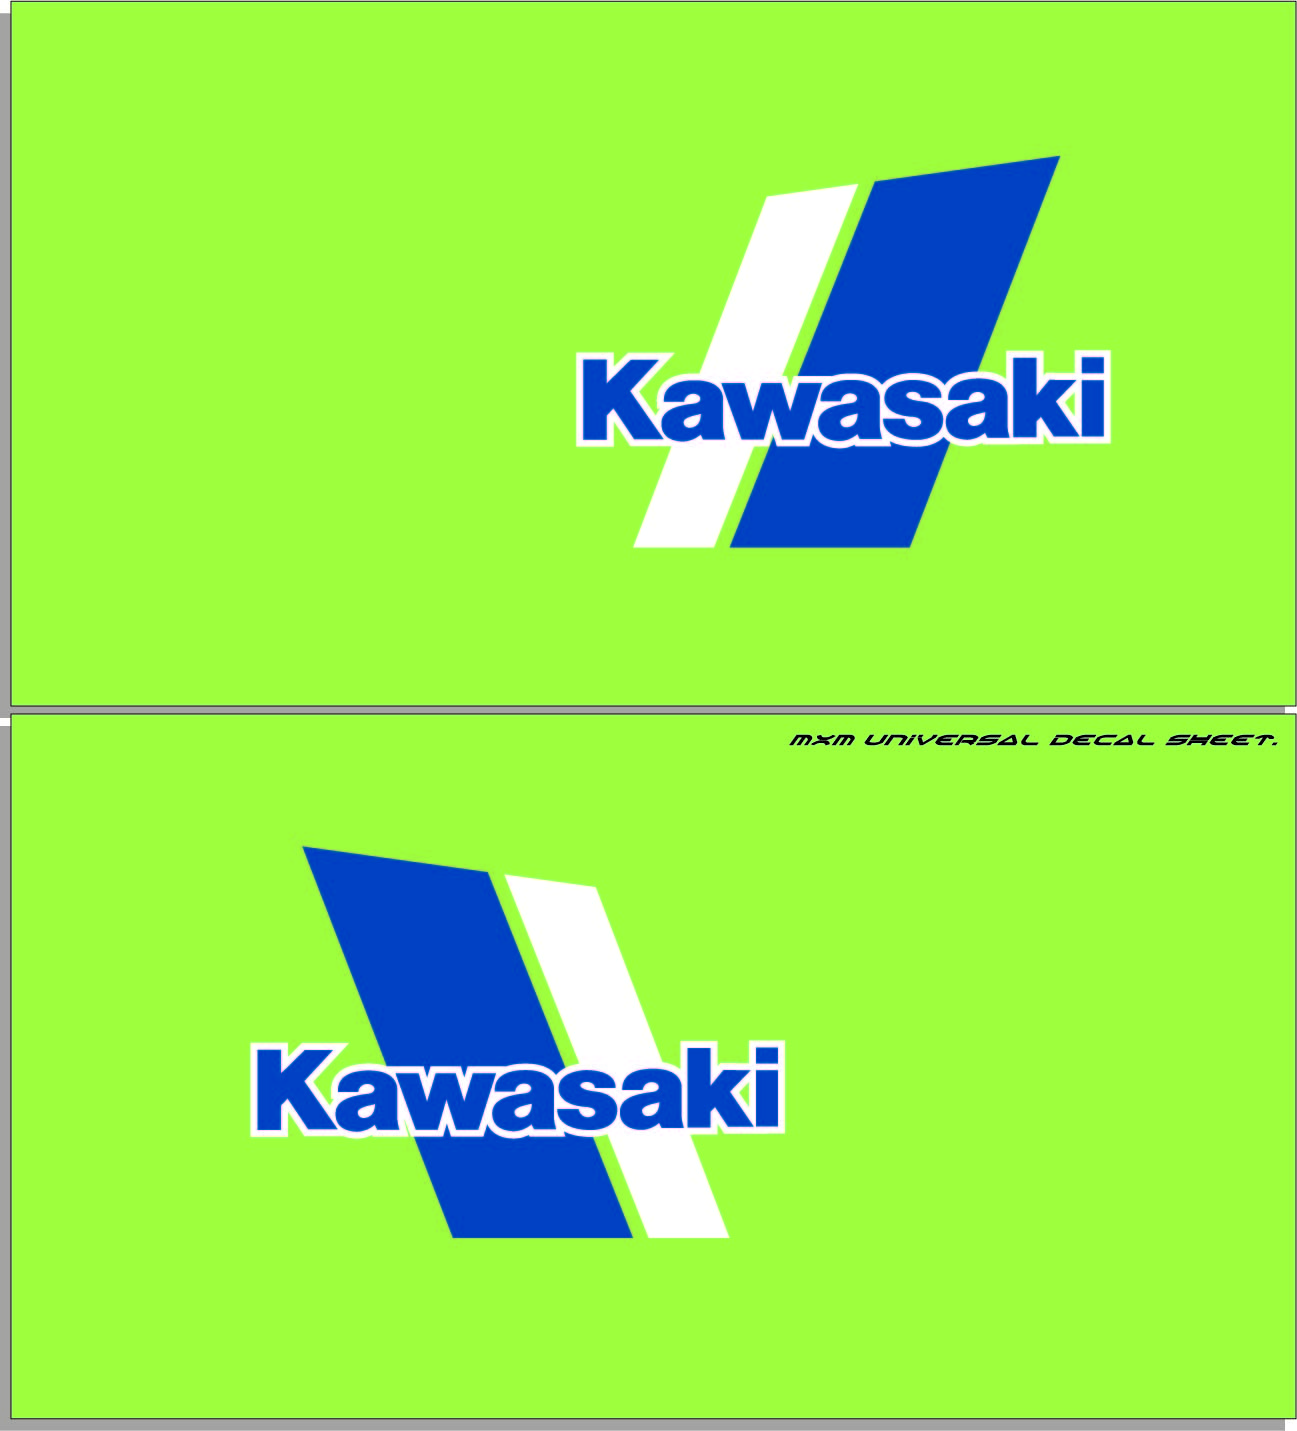 Everything About All Logos Kawasaki Logo Picture Gallery1